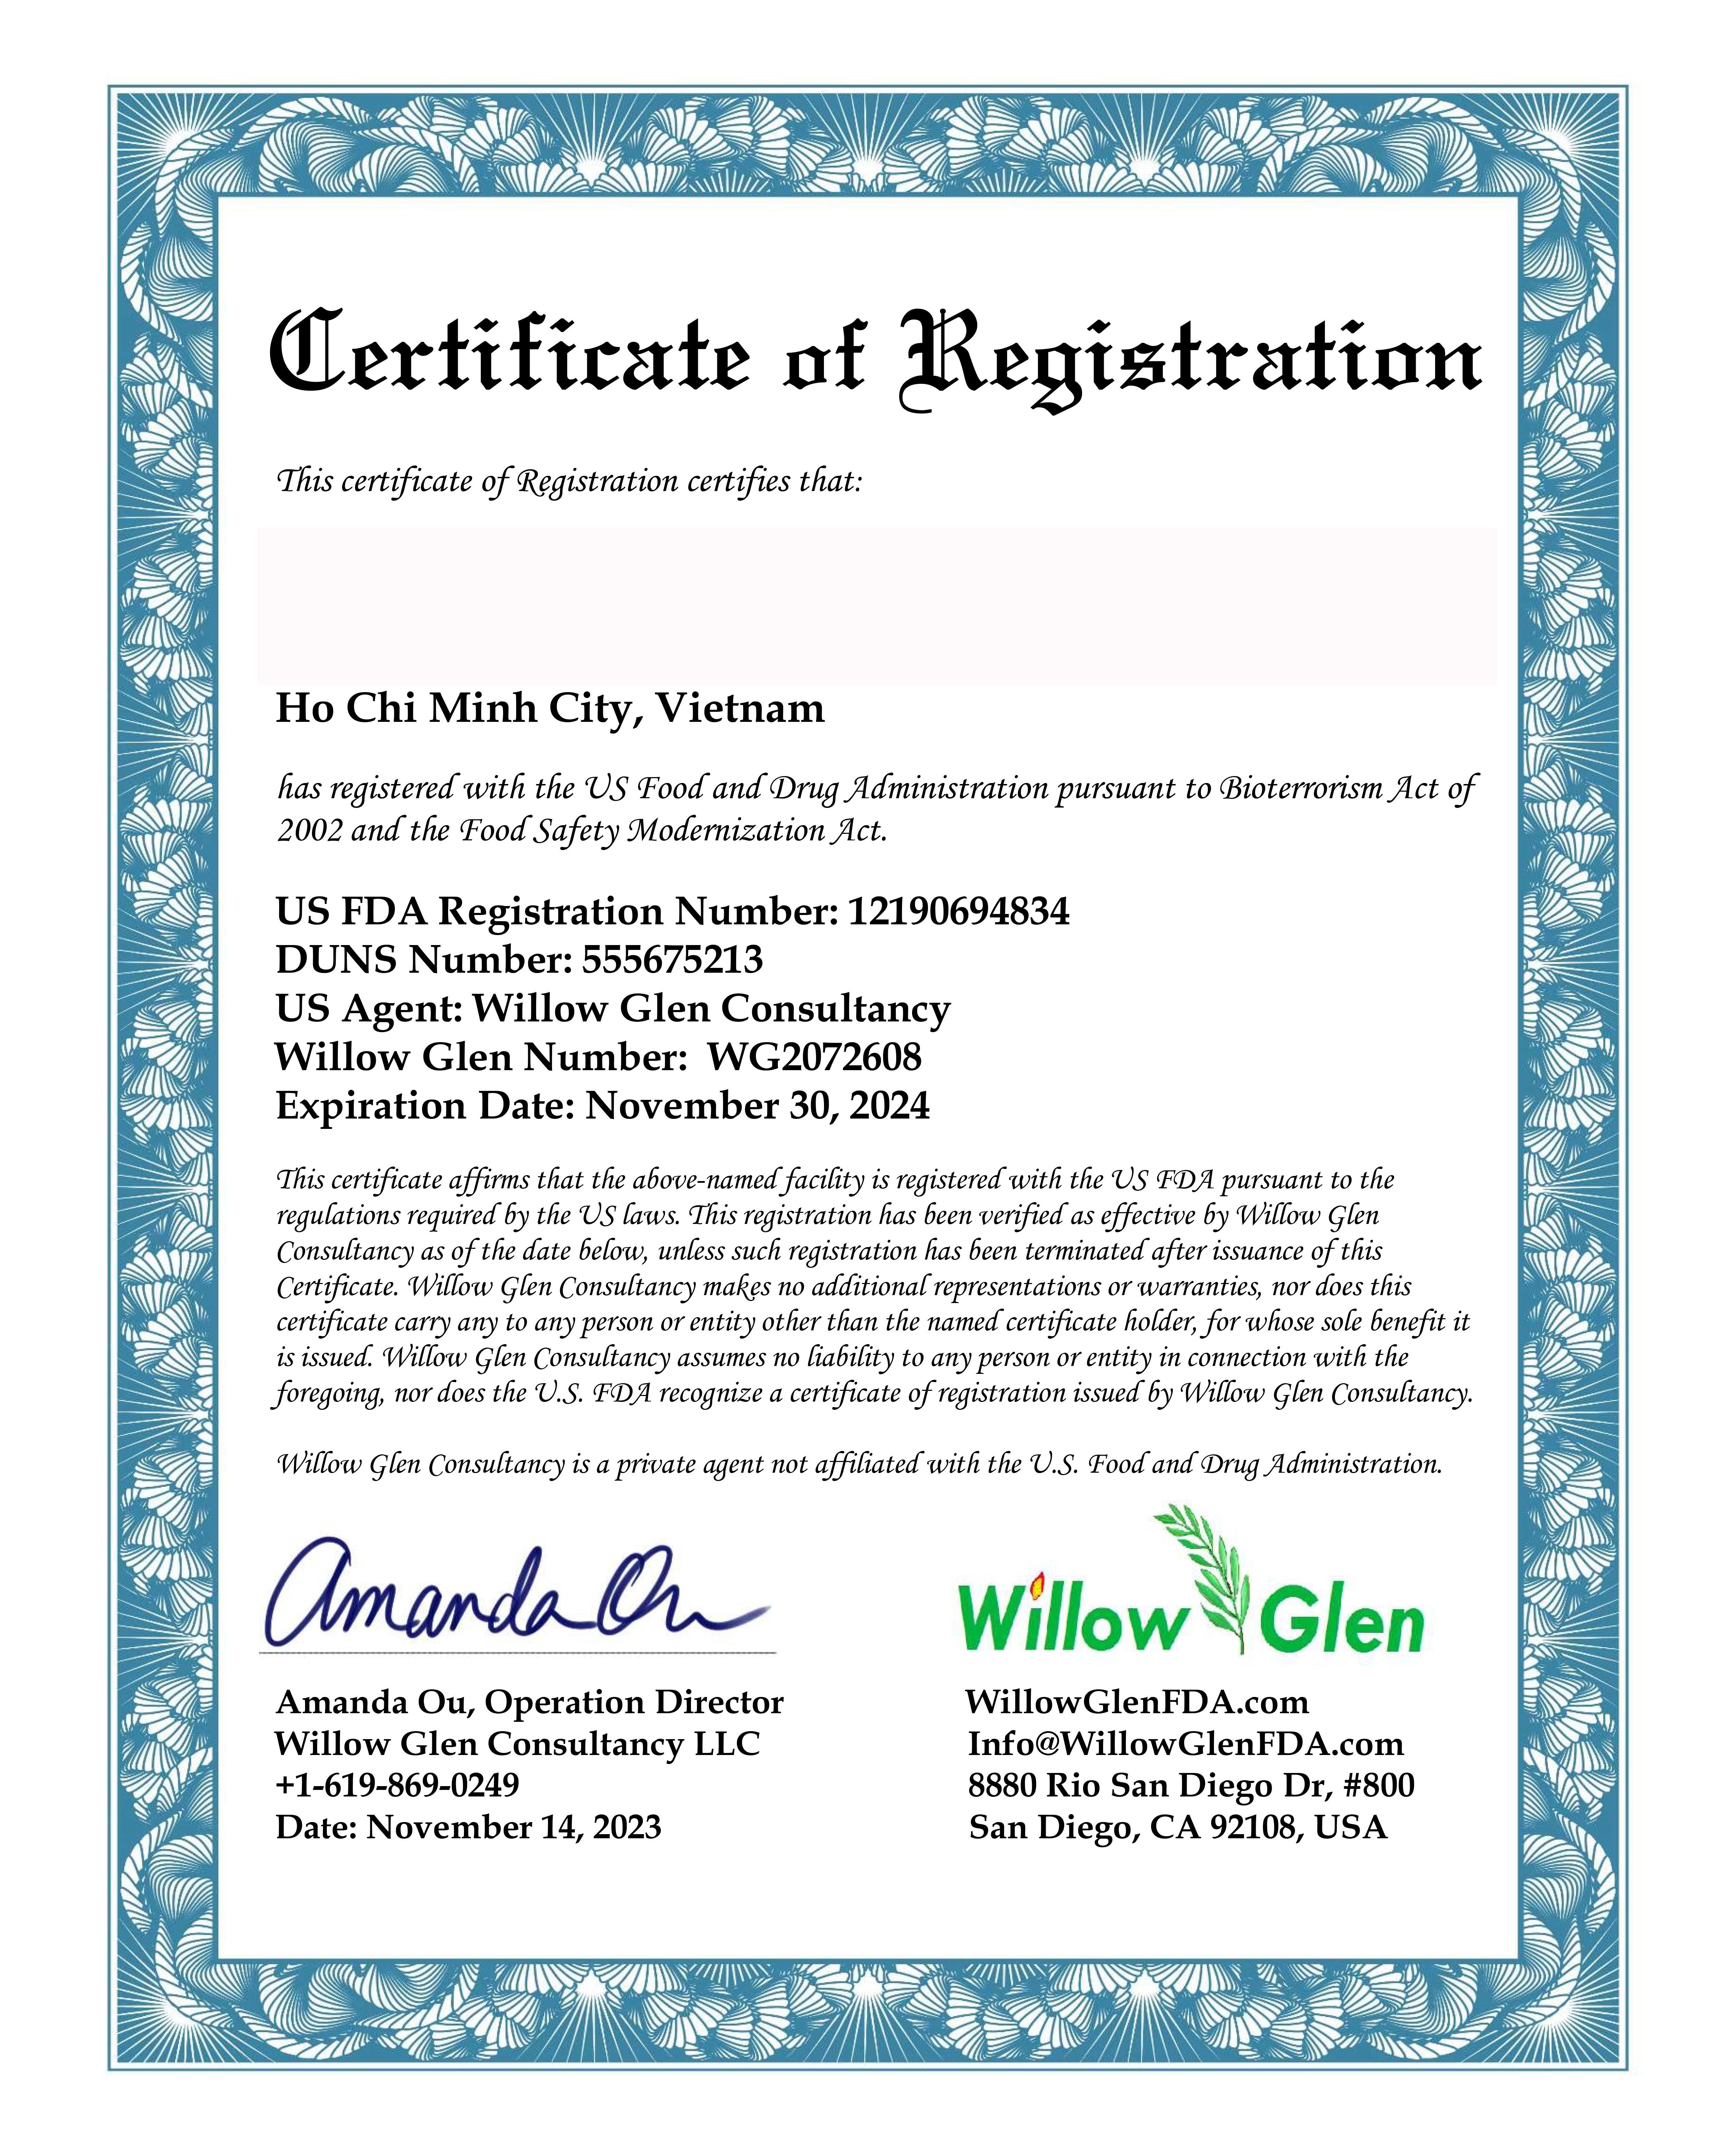 A certificate of registration with blue borderDescription automatically generated